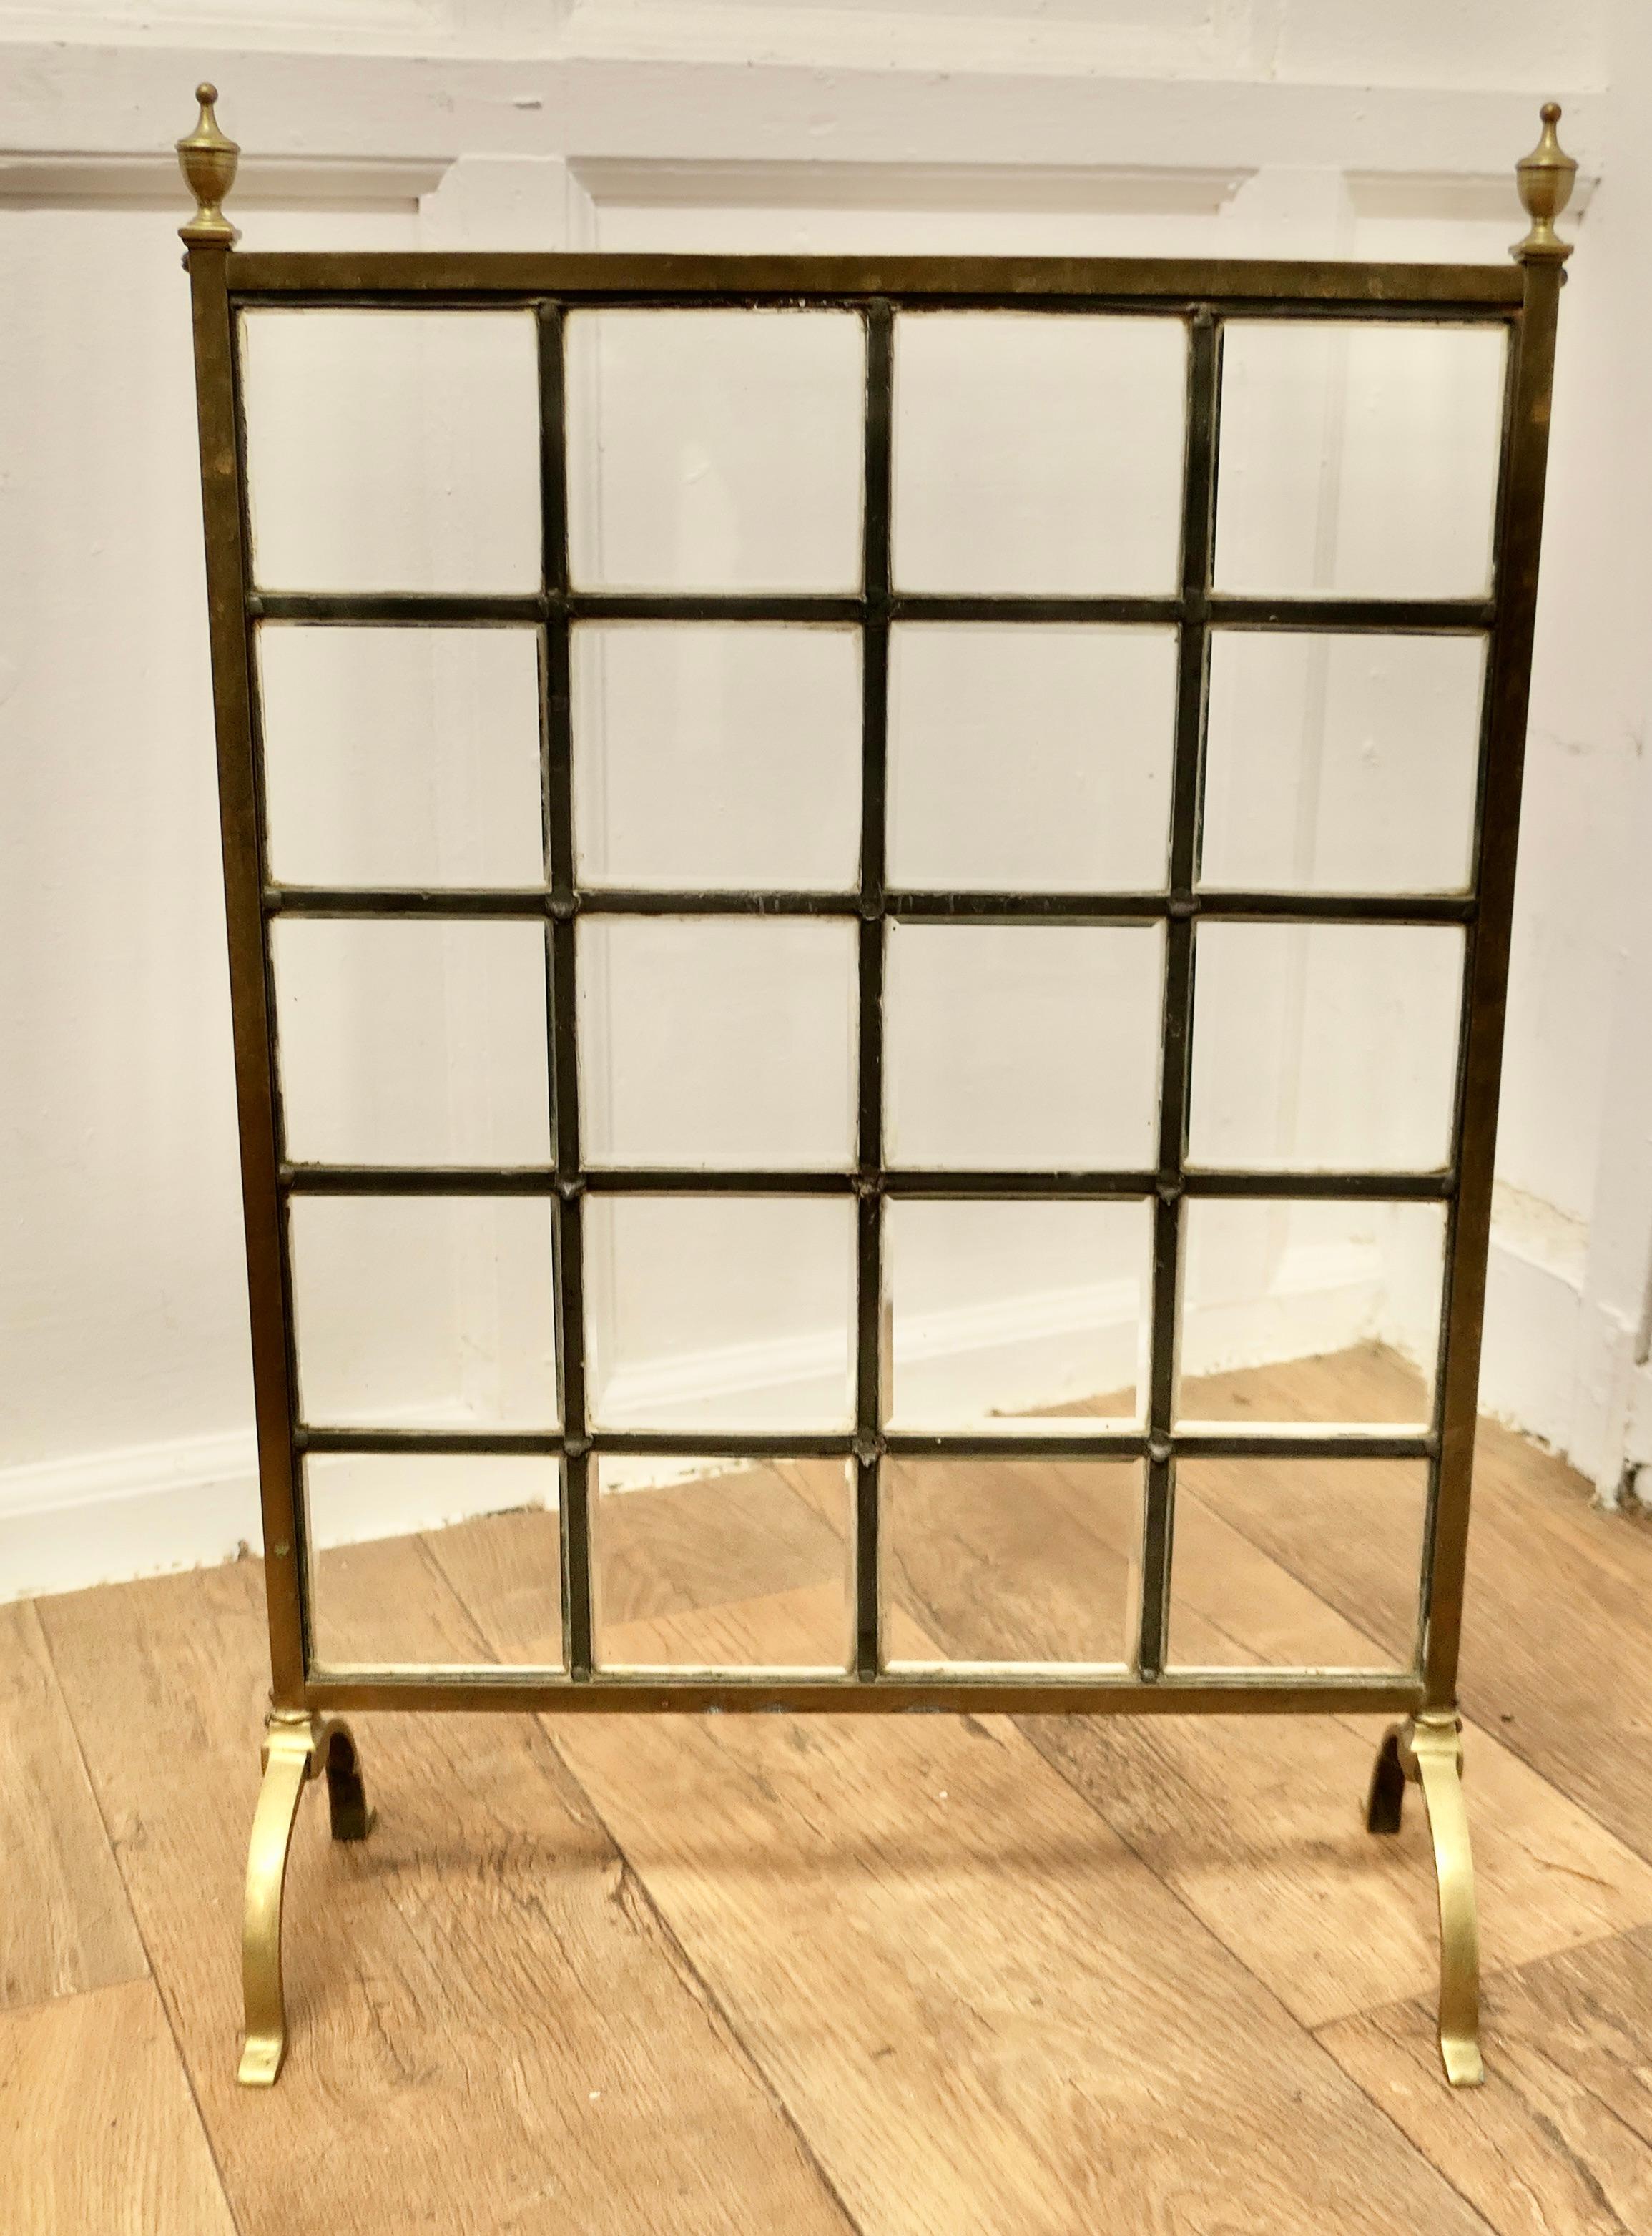 A Victorian Brass and Glass Art Nouveau Fire Screen

This is a most charming Fire Screen in the art nouveau style, it has superb  brass finials and is set on brass feet, the centre of the screen is made in square bevelled glass panels.
The screen is